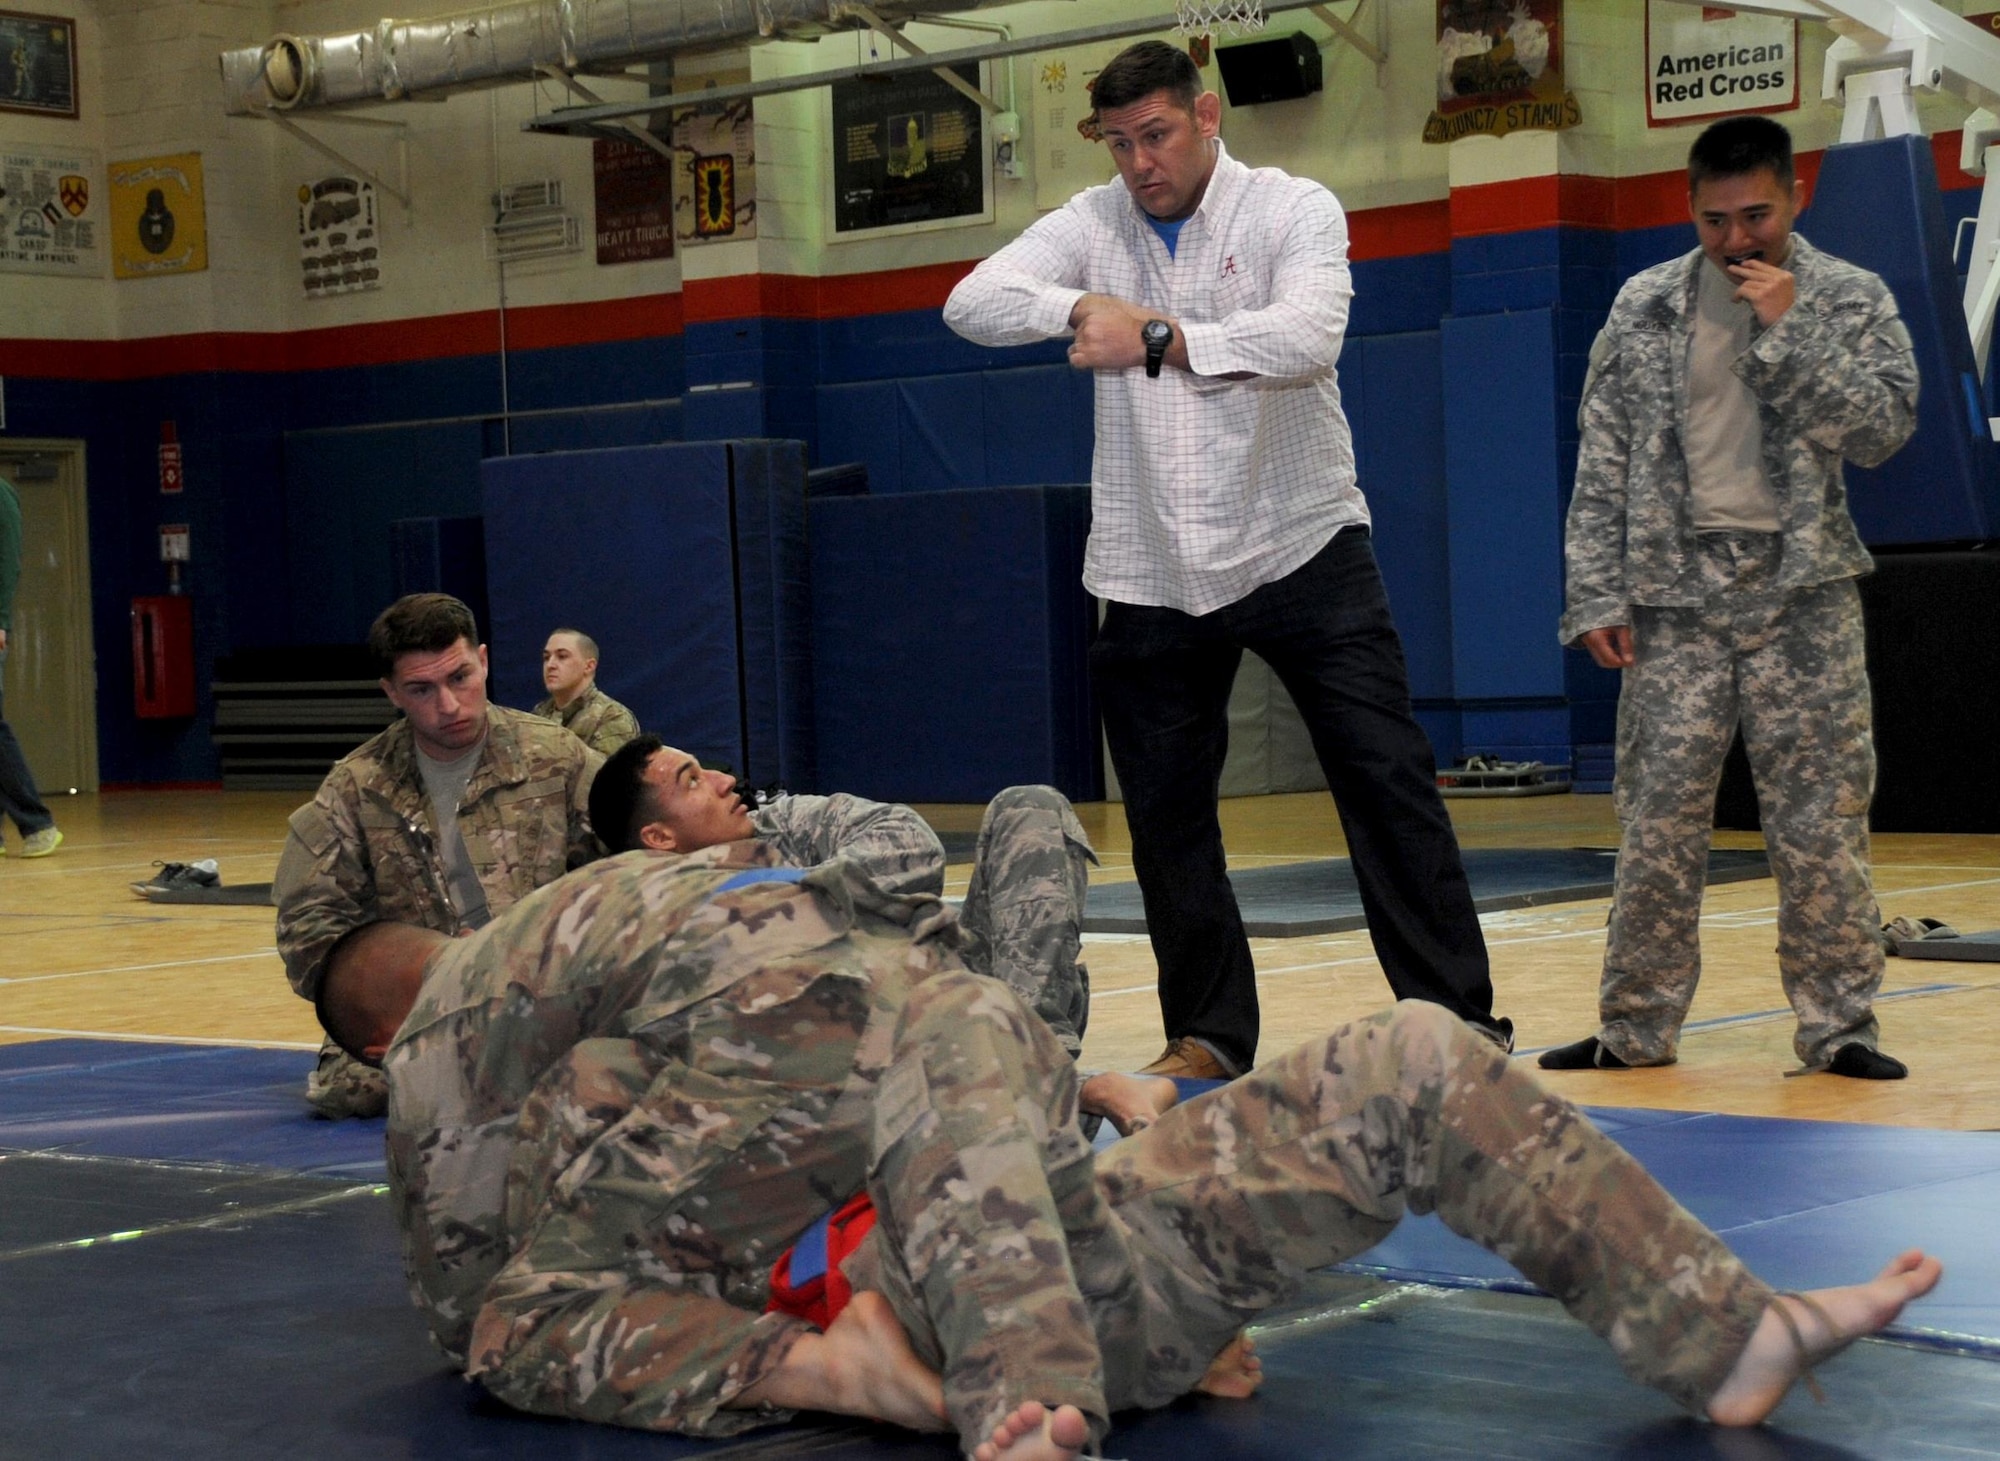 Master Sgt. Royce Kerbow 386th Air Expeditionary Wing command post superintendent, coaches his student during an Army combatives tournament match at an undisclosed location in Southwest Asia January 22, 2017. Kerbow prepared his students with daily Brazilian jujitsu work outs. (U.S. Air Force photo/Tech. Sgt. Kenneth McCann)